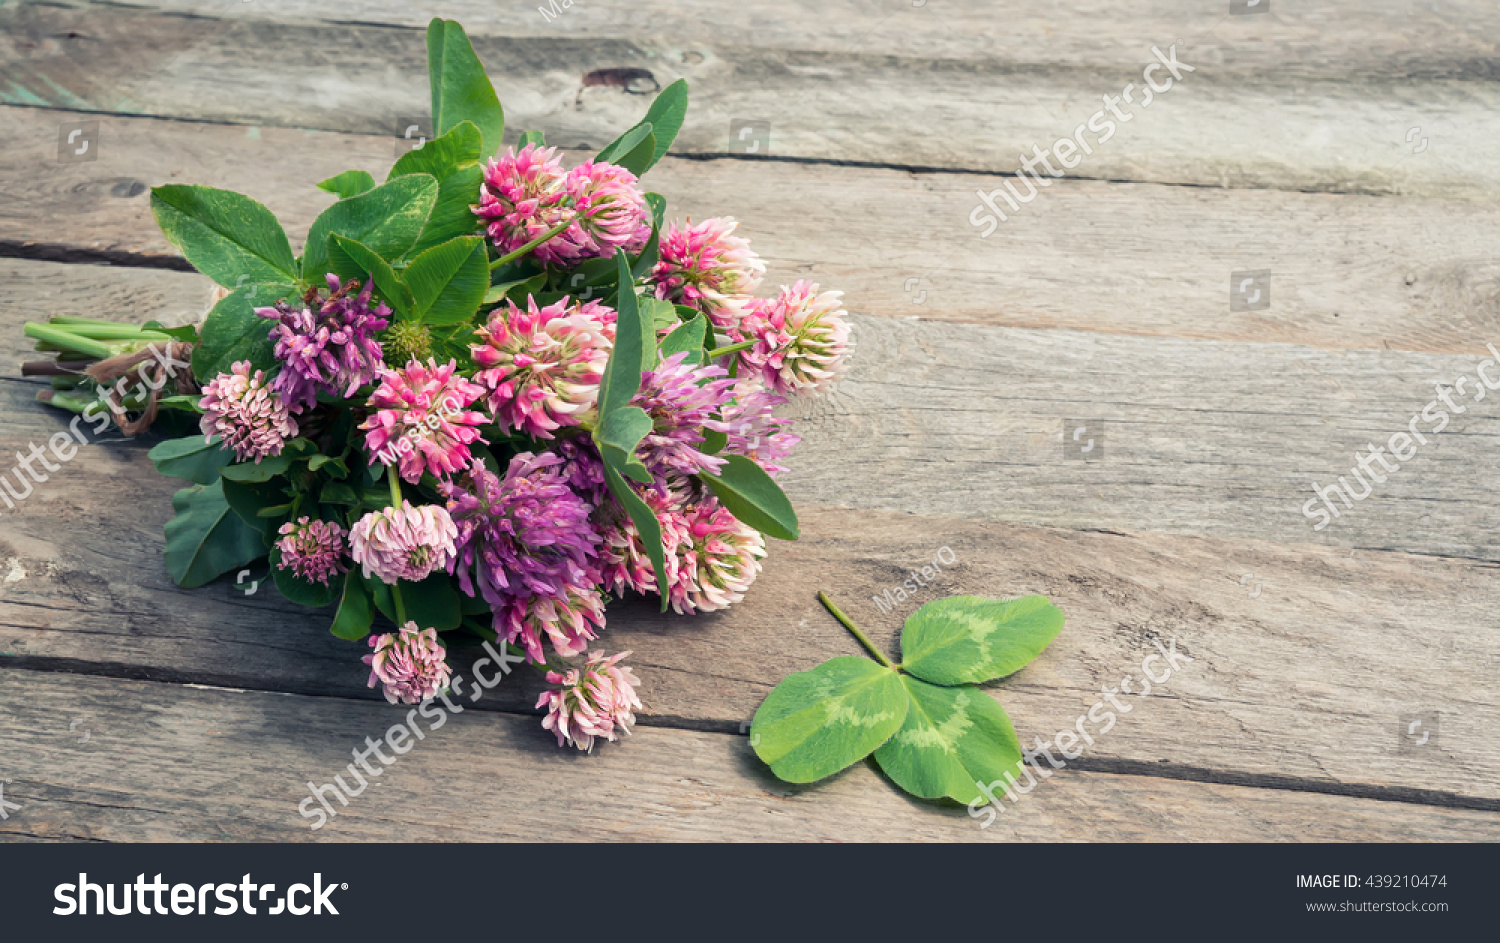 Clover flowers bouquet with leaves on wooden background at sunset light. Romantic scene.  #439210474